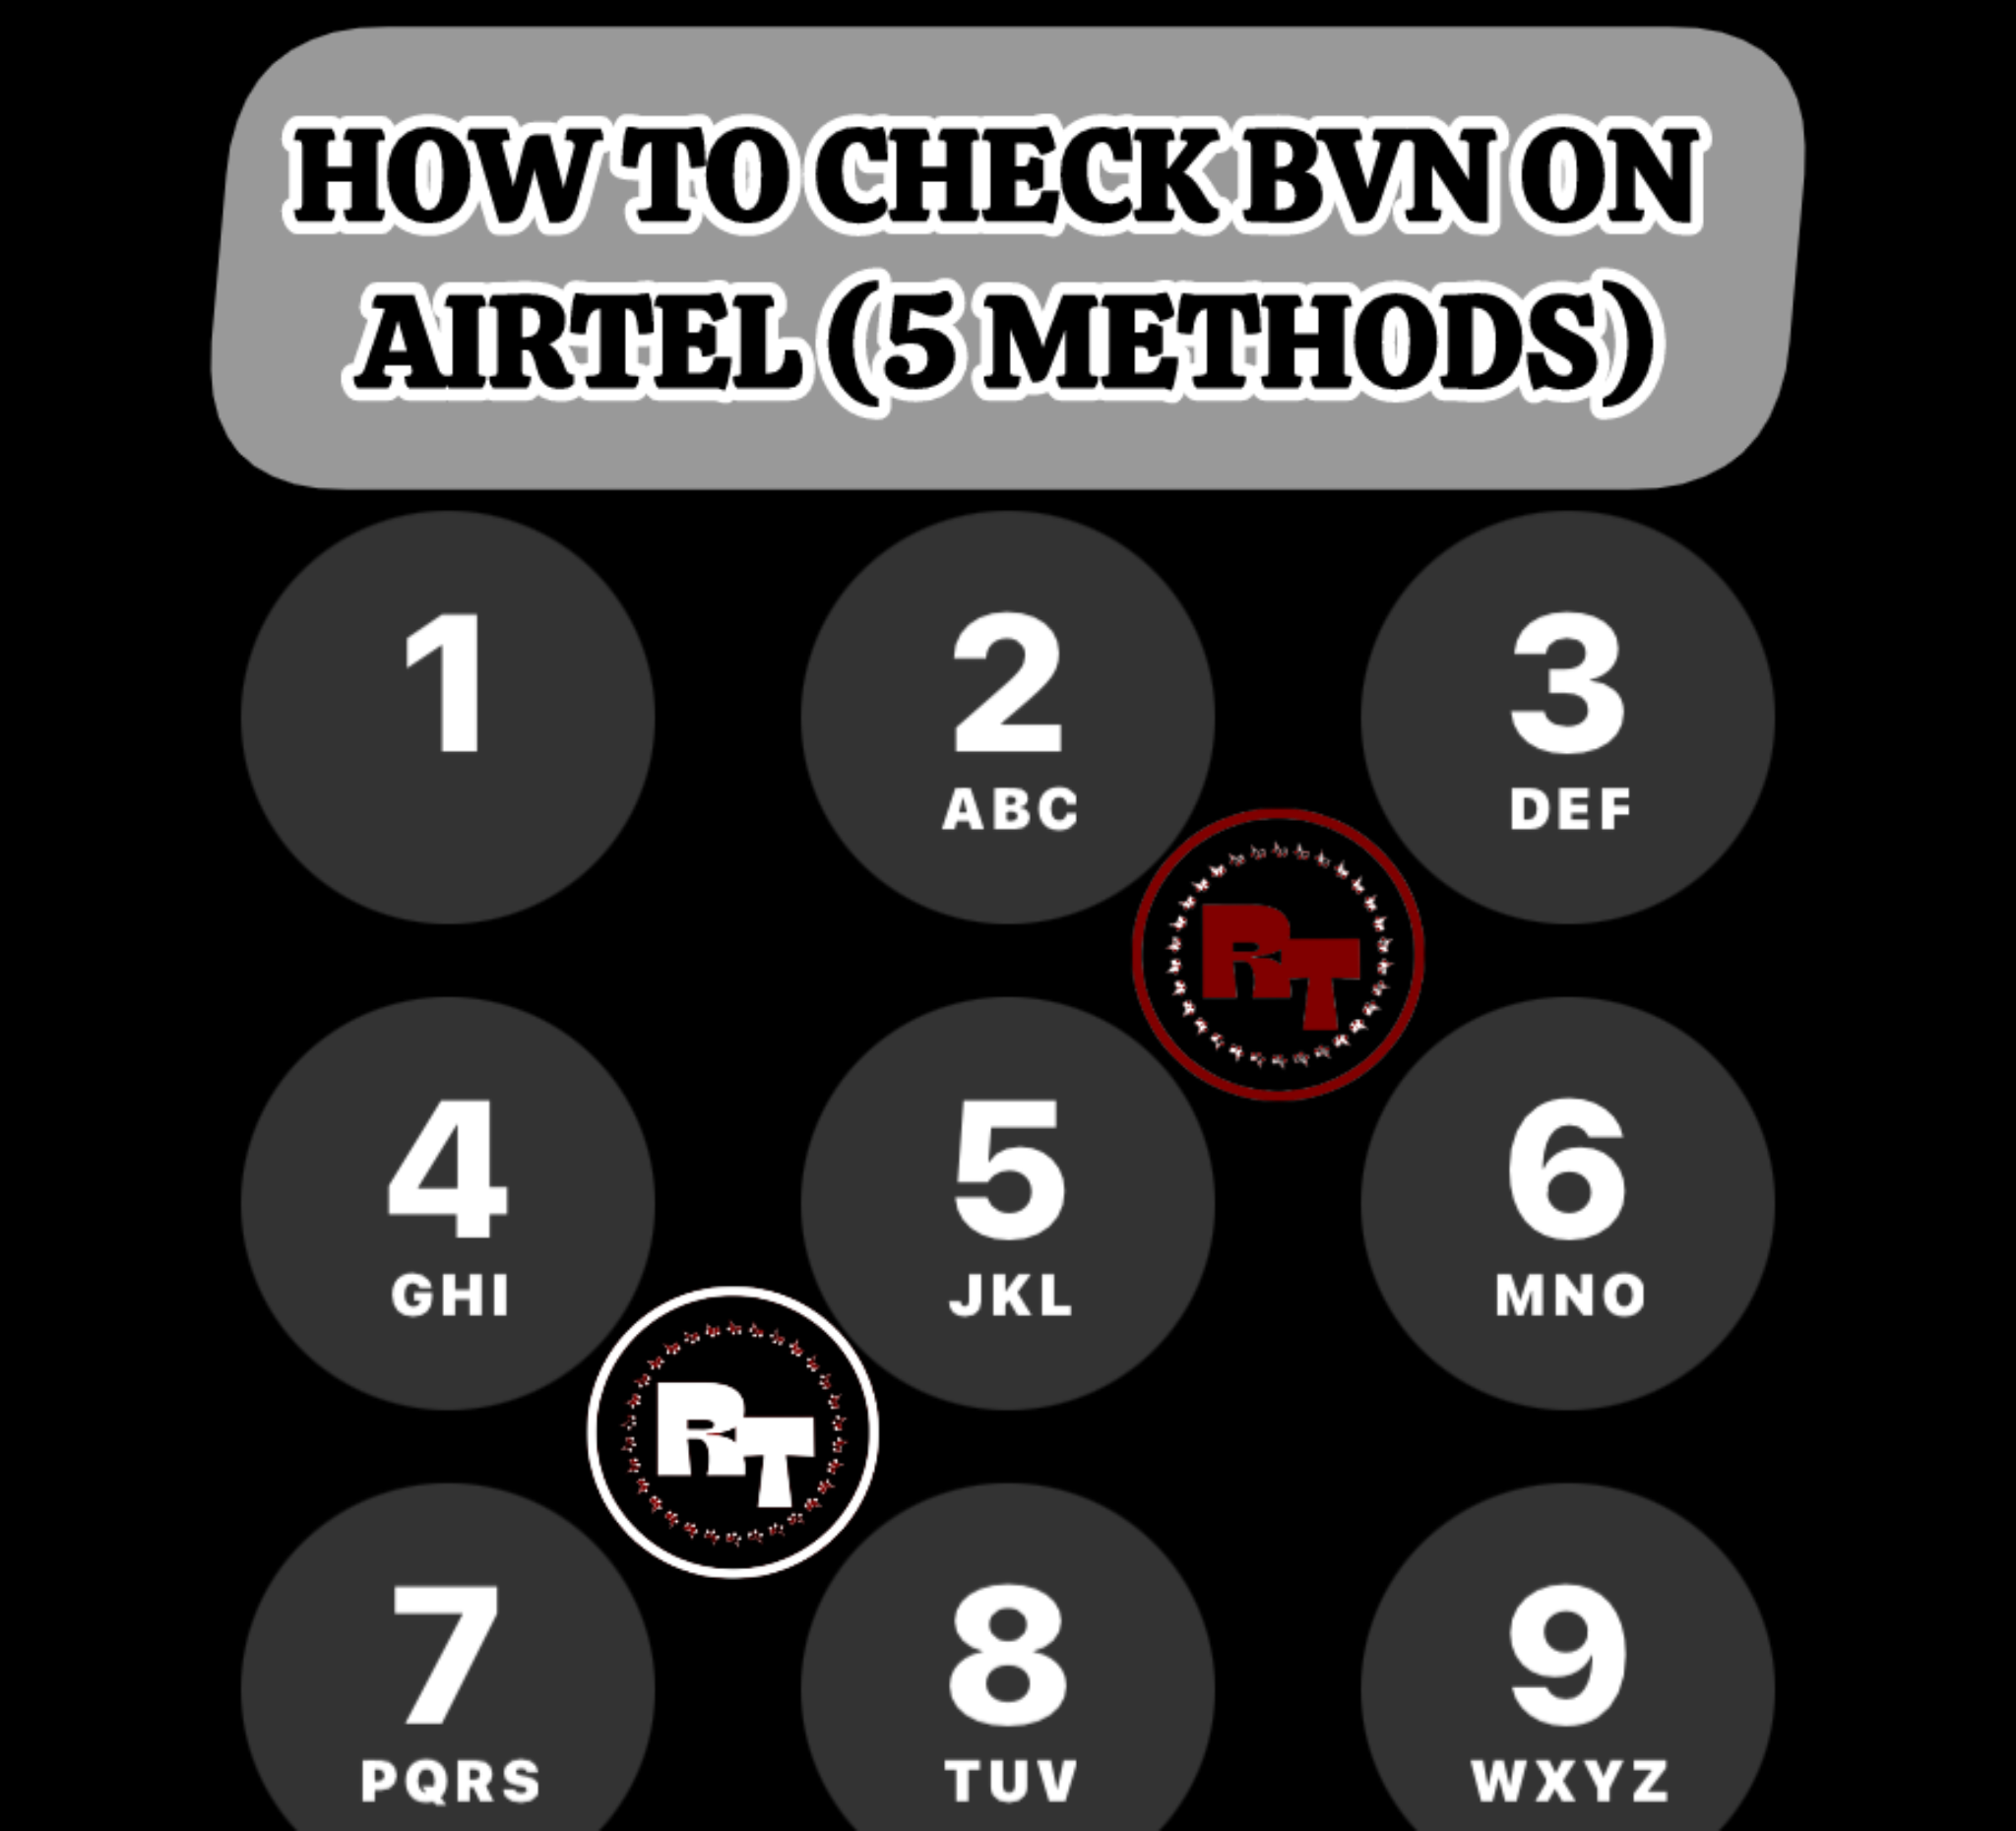 How To Check BVN On Airtel